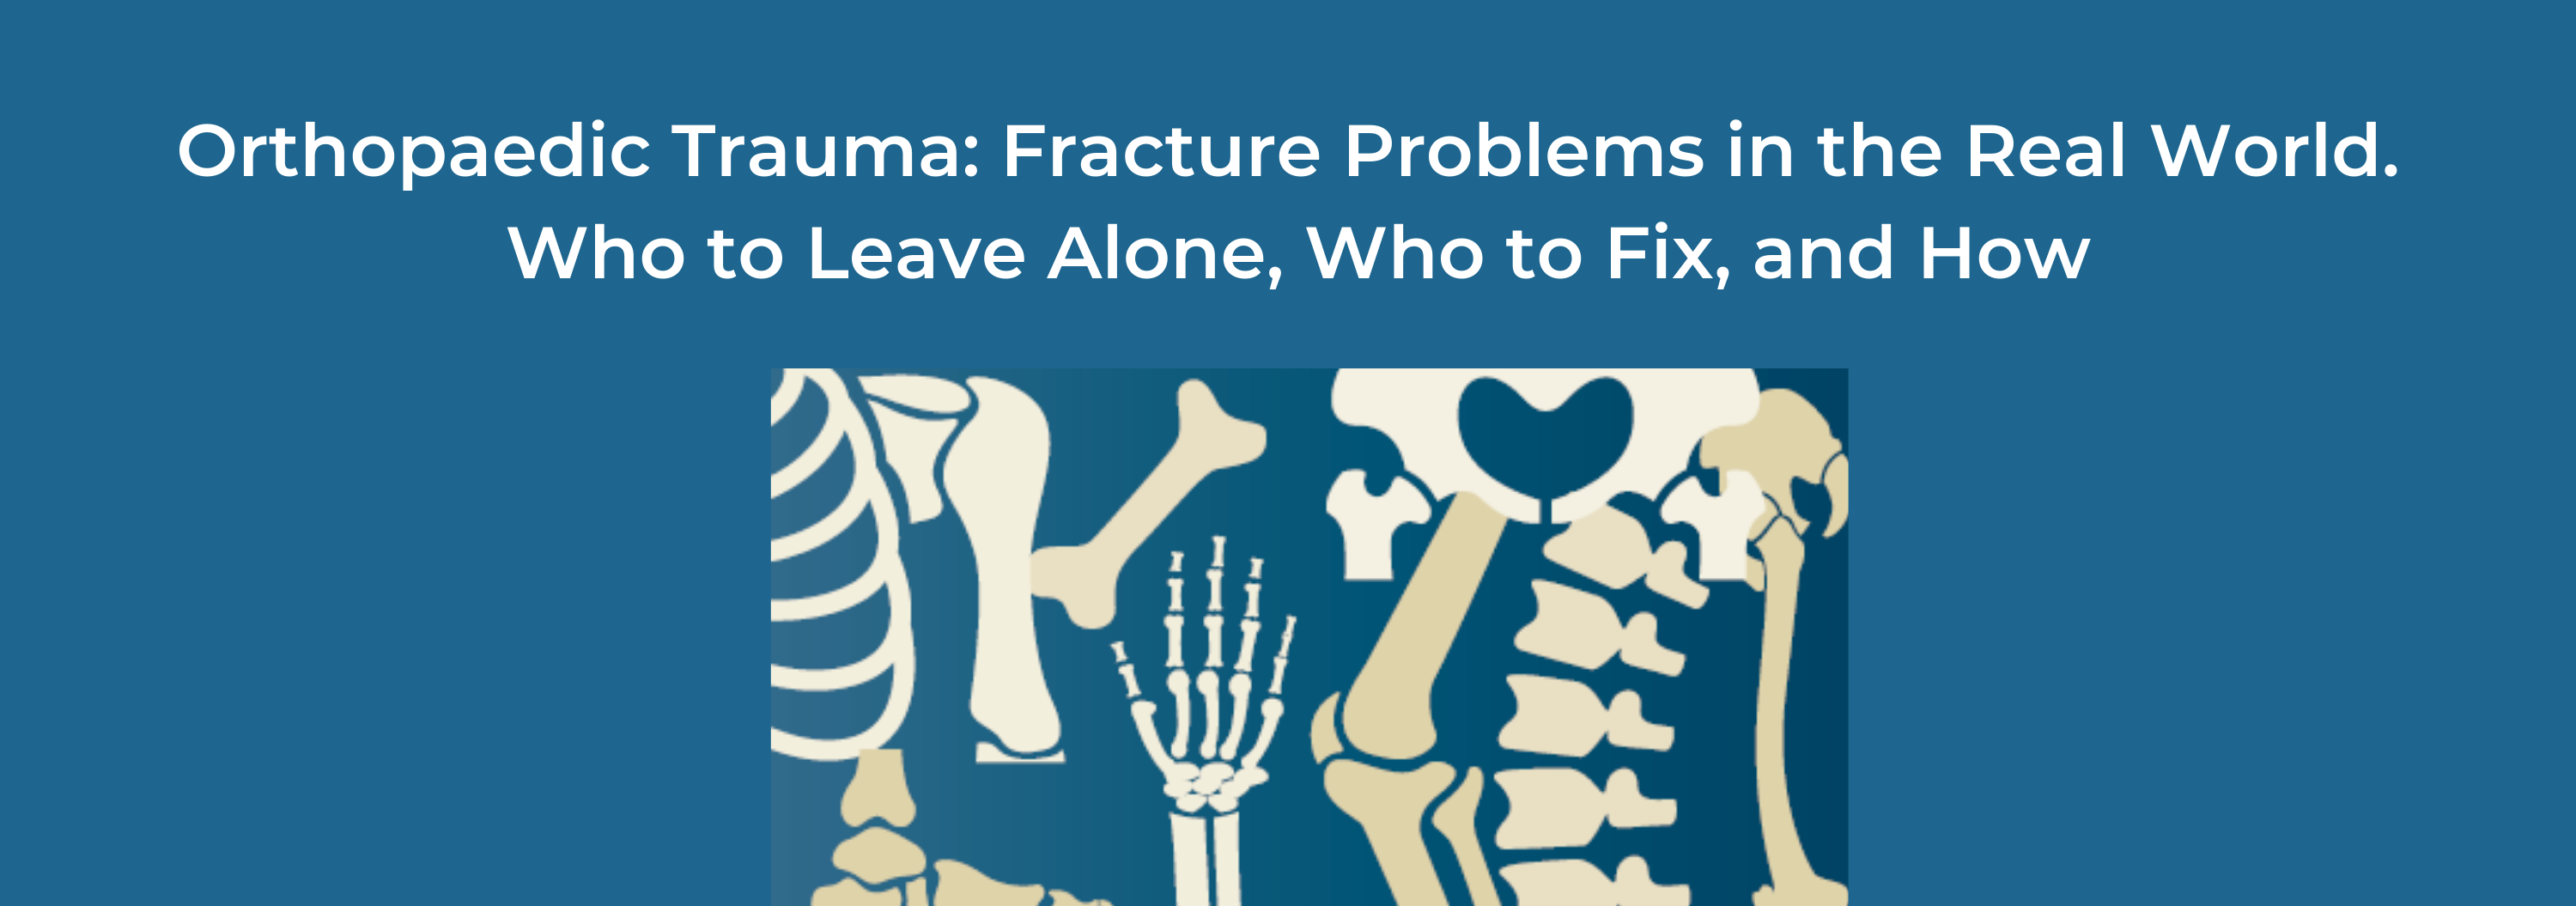 2019 Orthopaedic Trauma: Fracture Problems in the Real World. Who to Leave Alone, Who to Fix, and How Banner